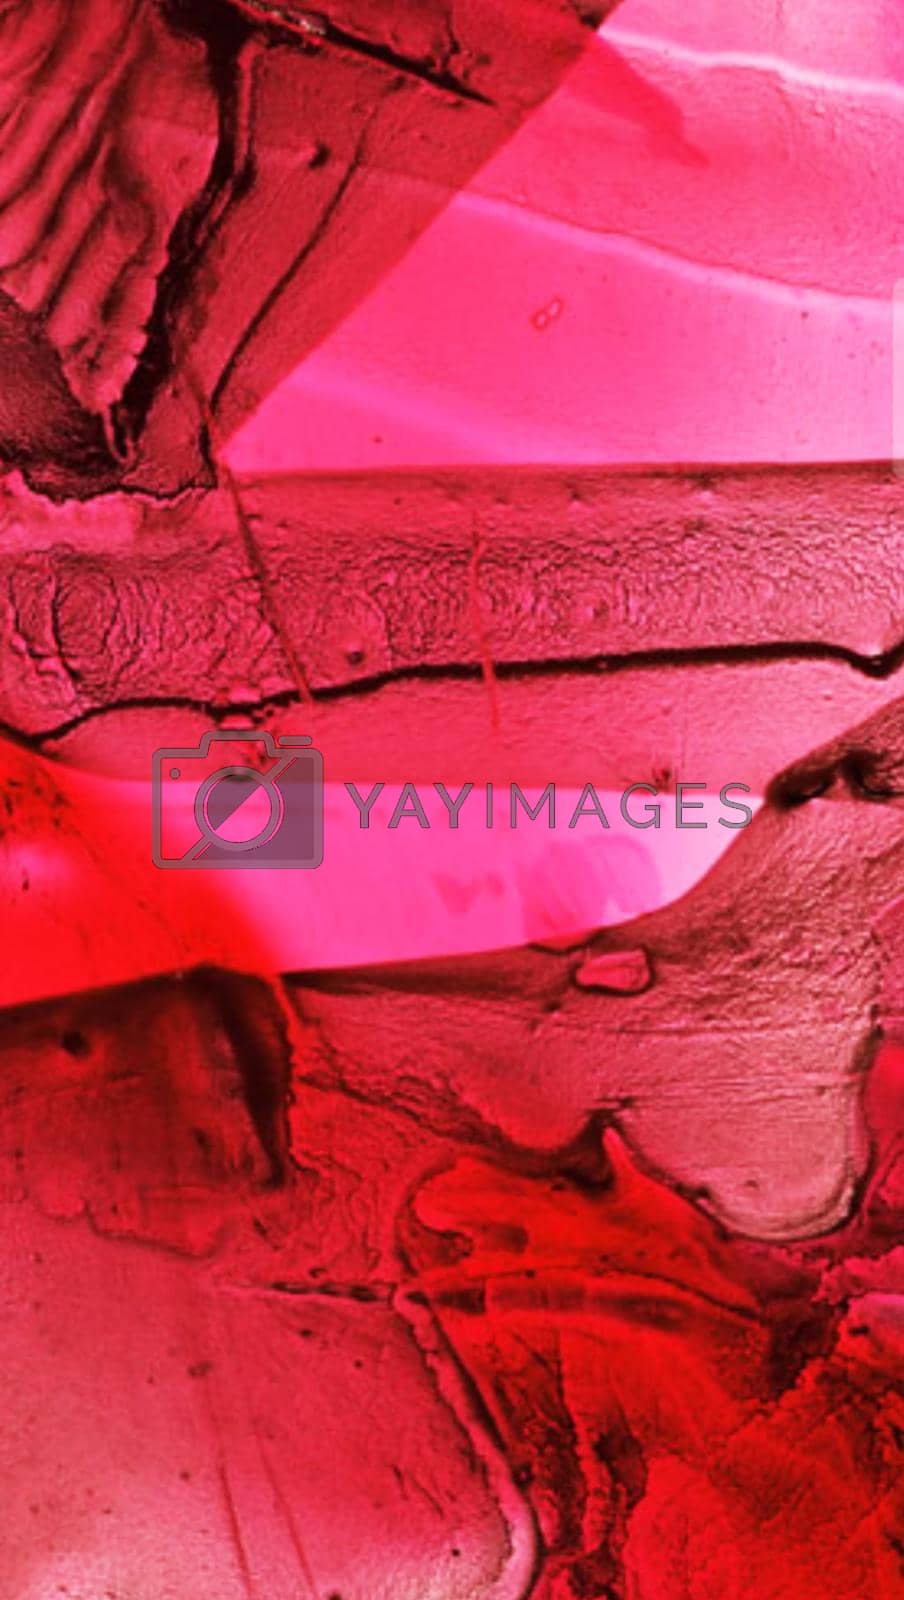 Royalty free image of Abstract art with creative and  inspirational background by TravelSync27